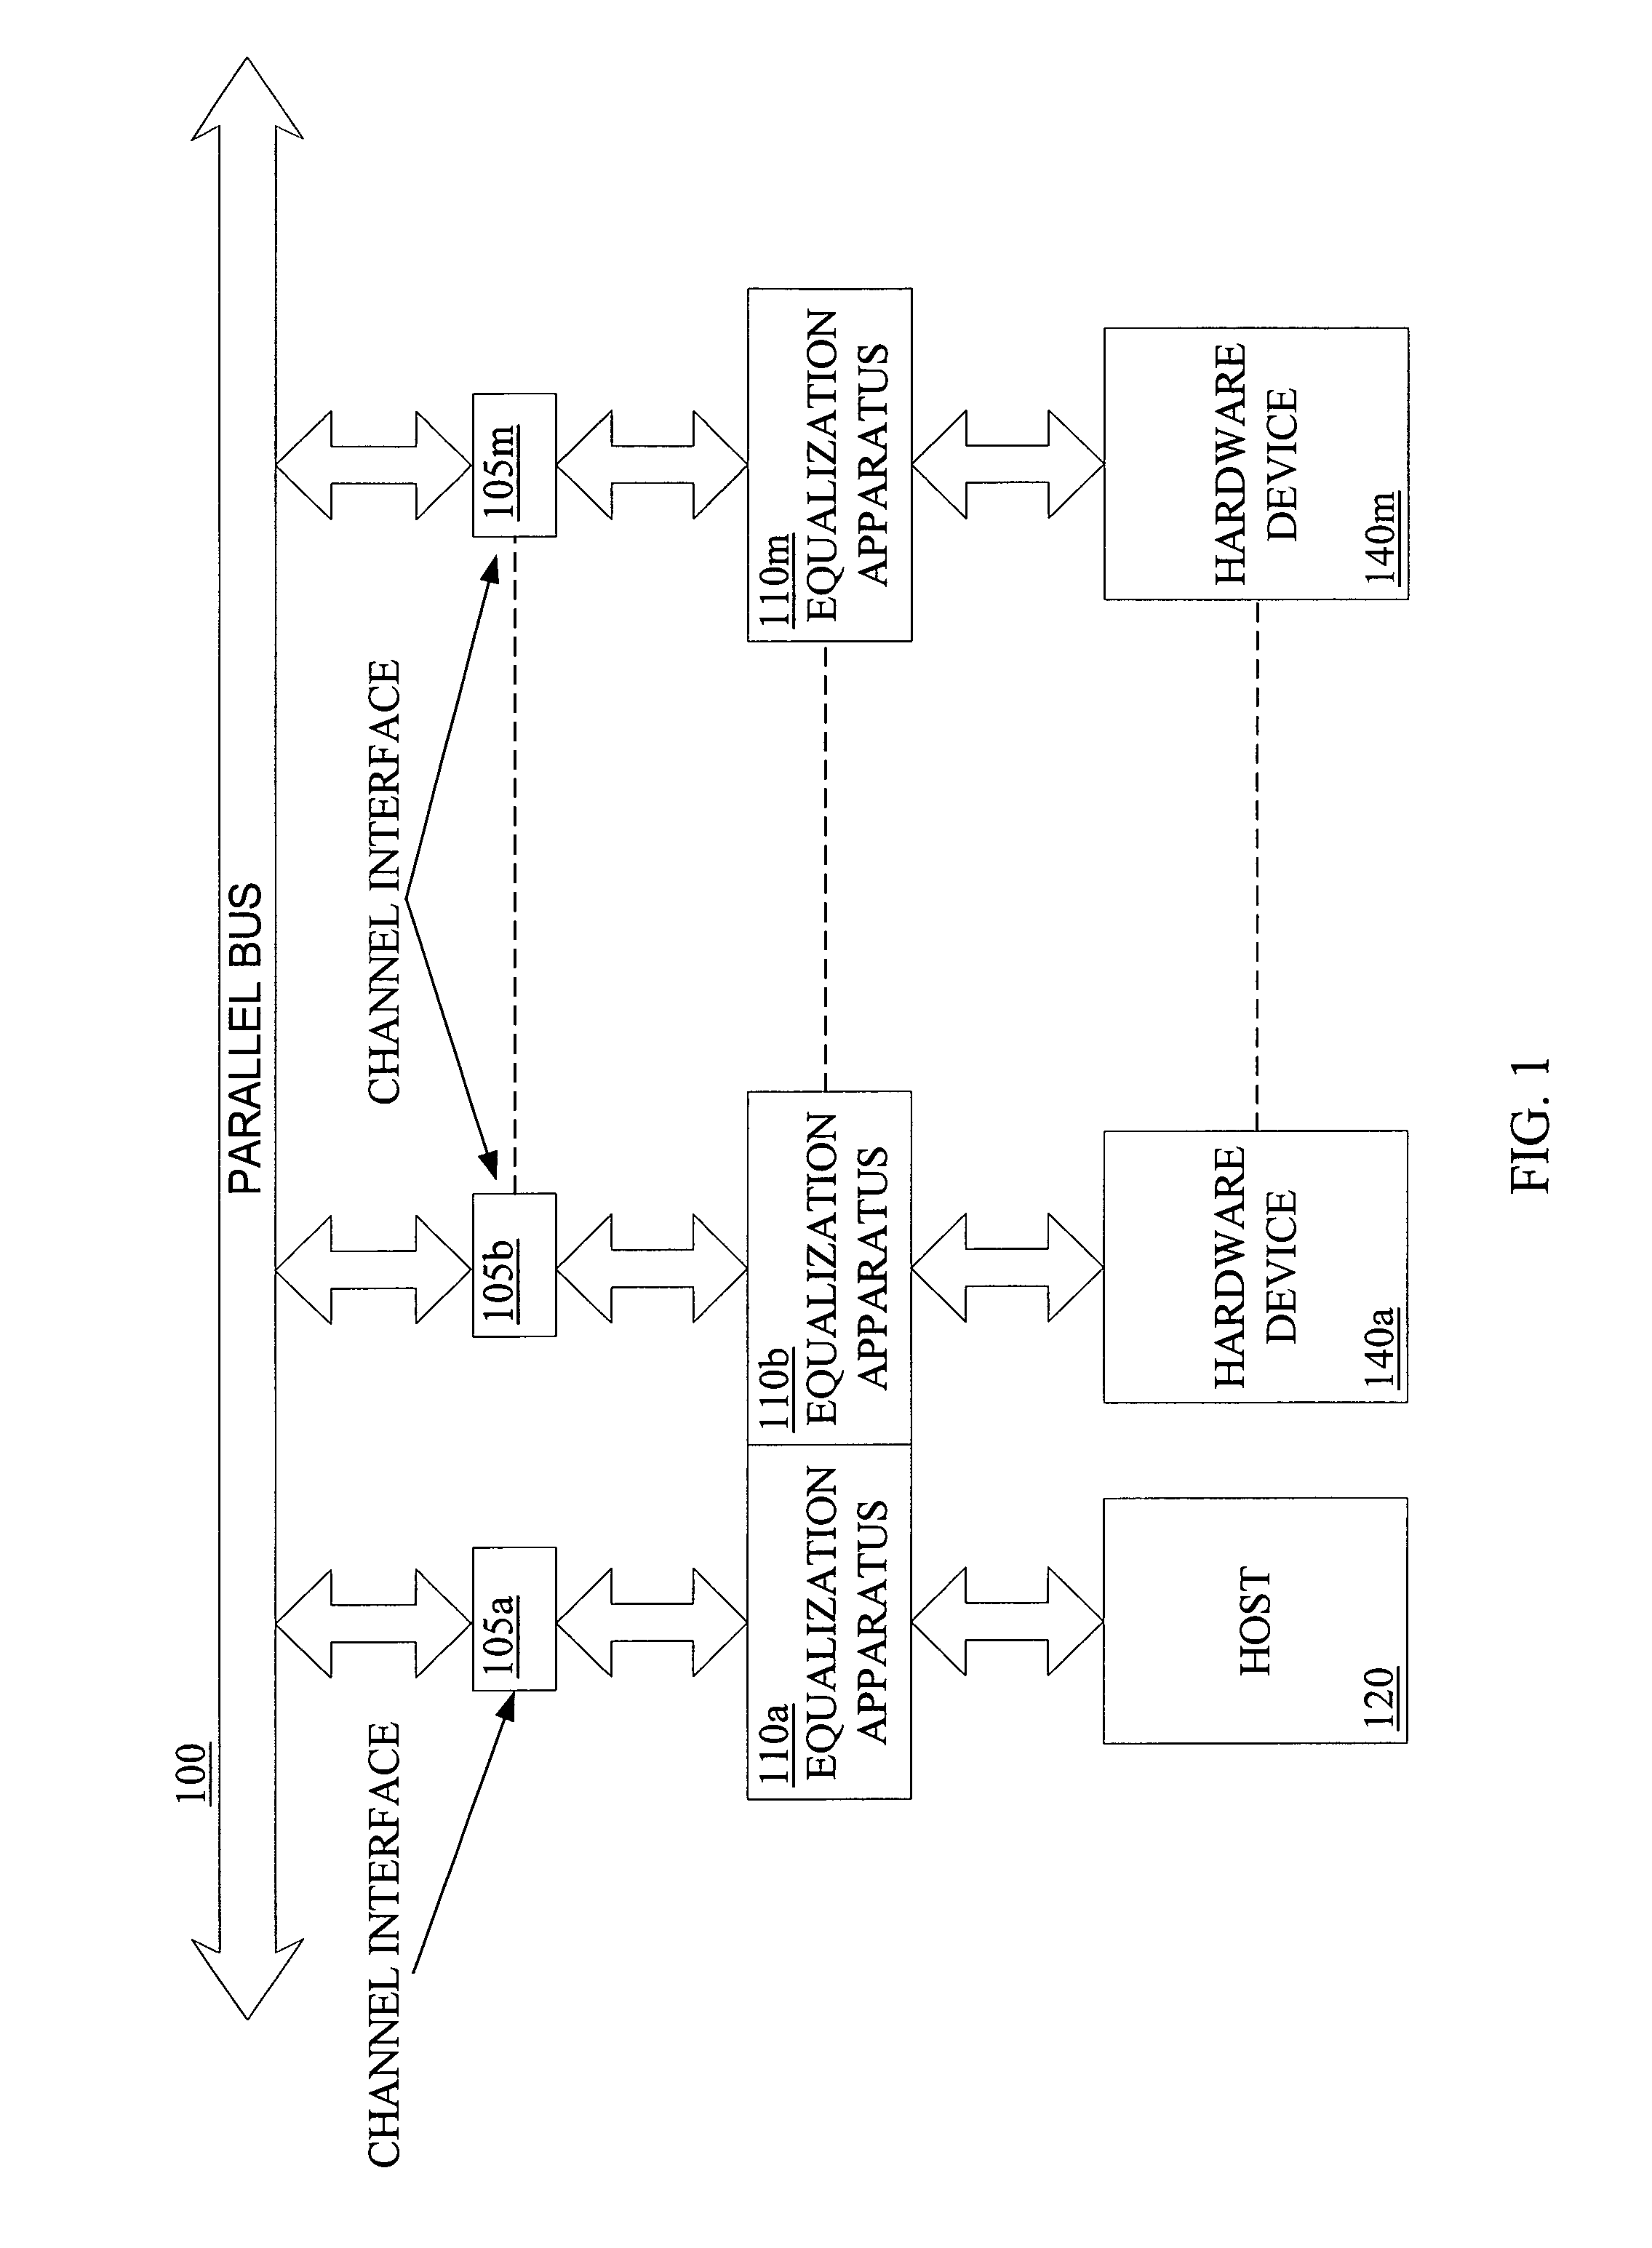 Mixed signal adaptive boost equalization apparatus and method